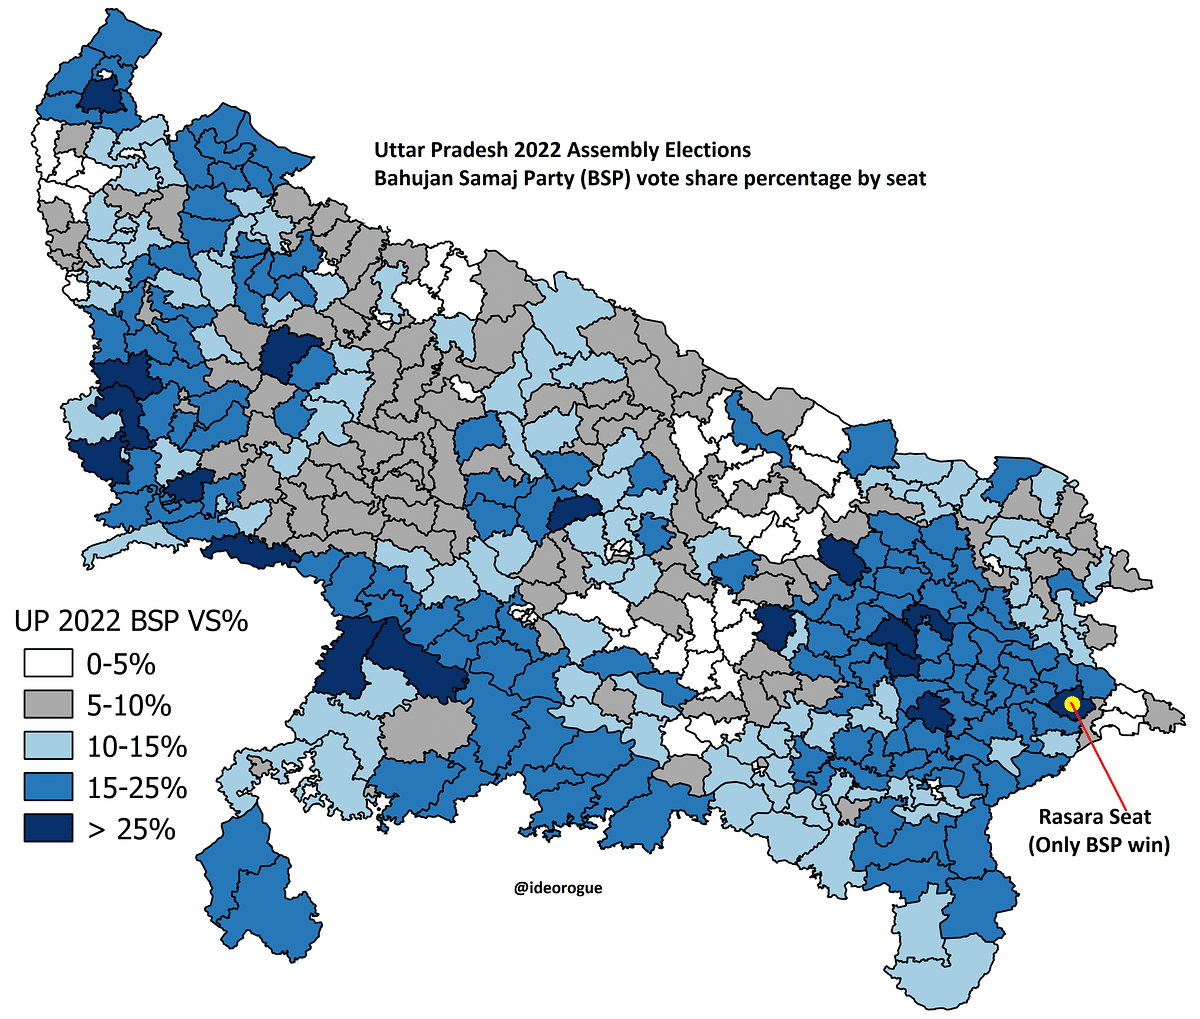 Map 1: UP 2022 BSP vote share 